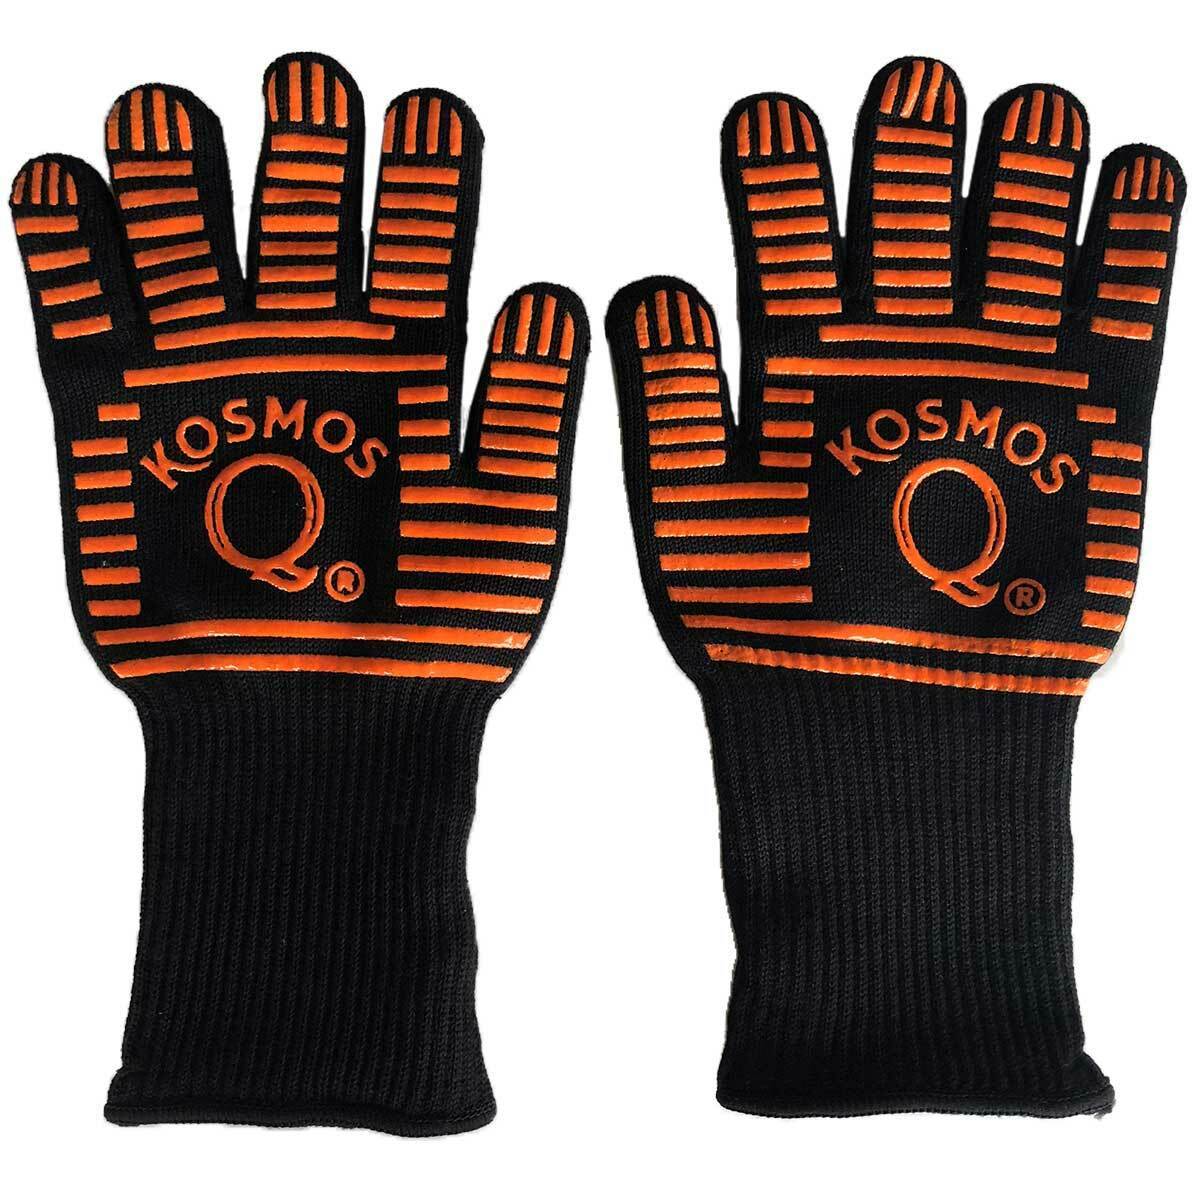 Kosmo's Q BBQ Accessories Heat-Resistant Grill Gloves